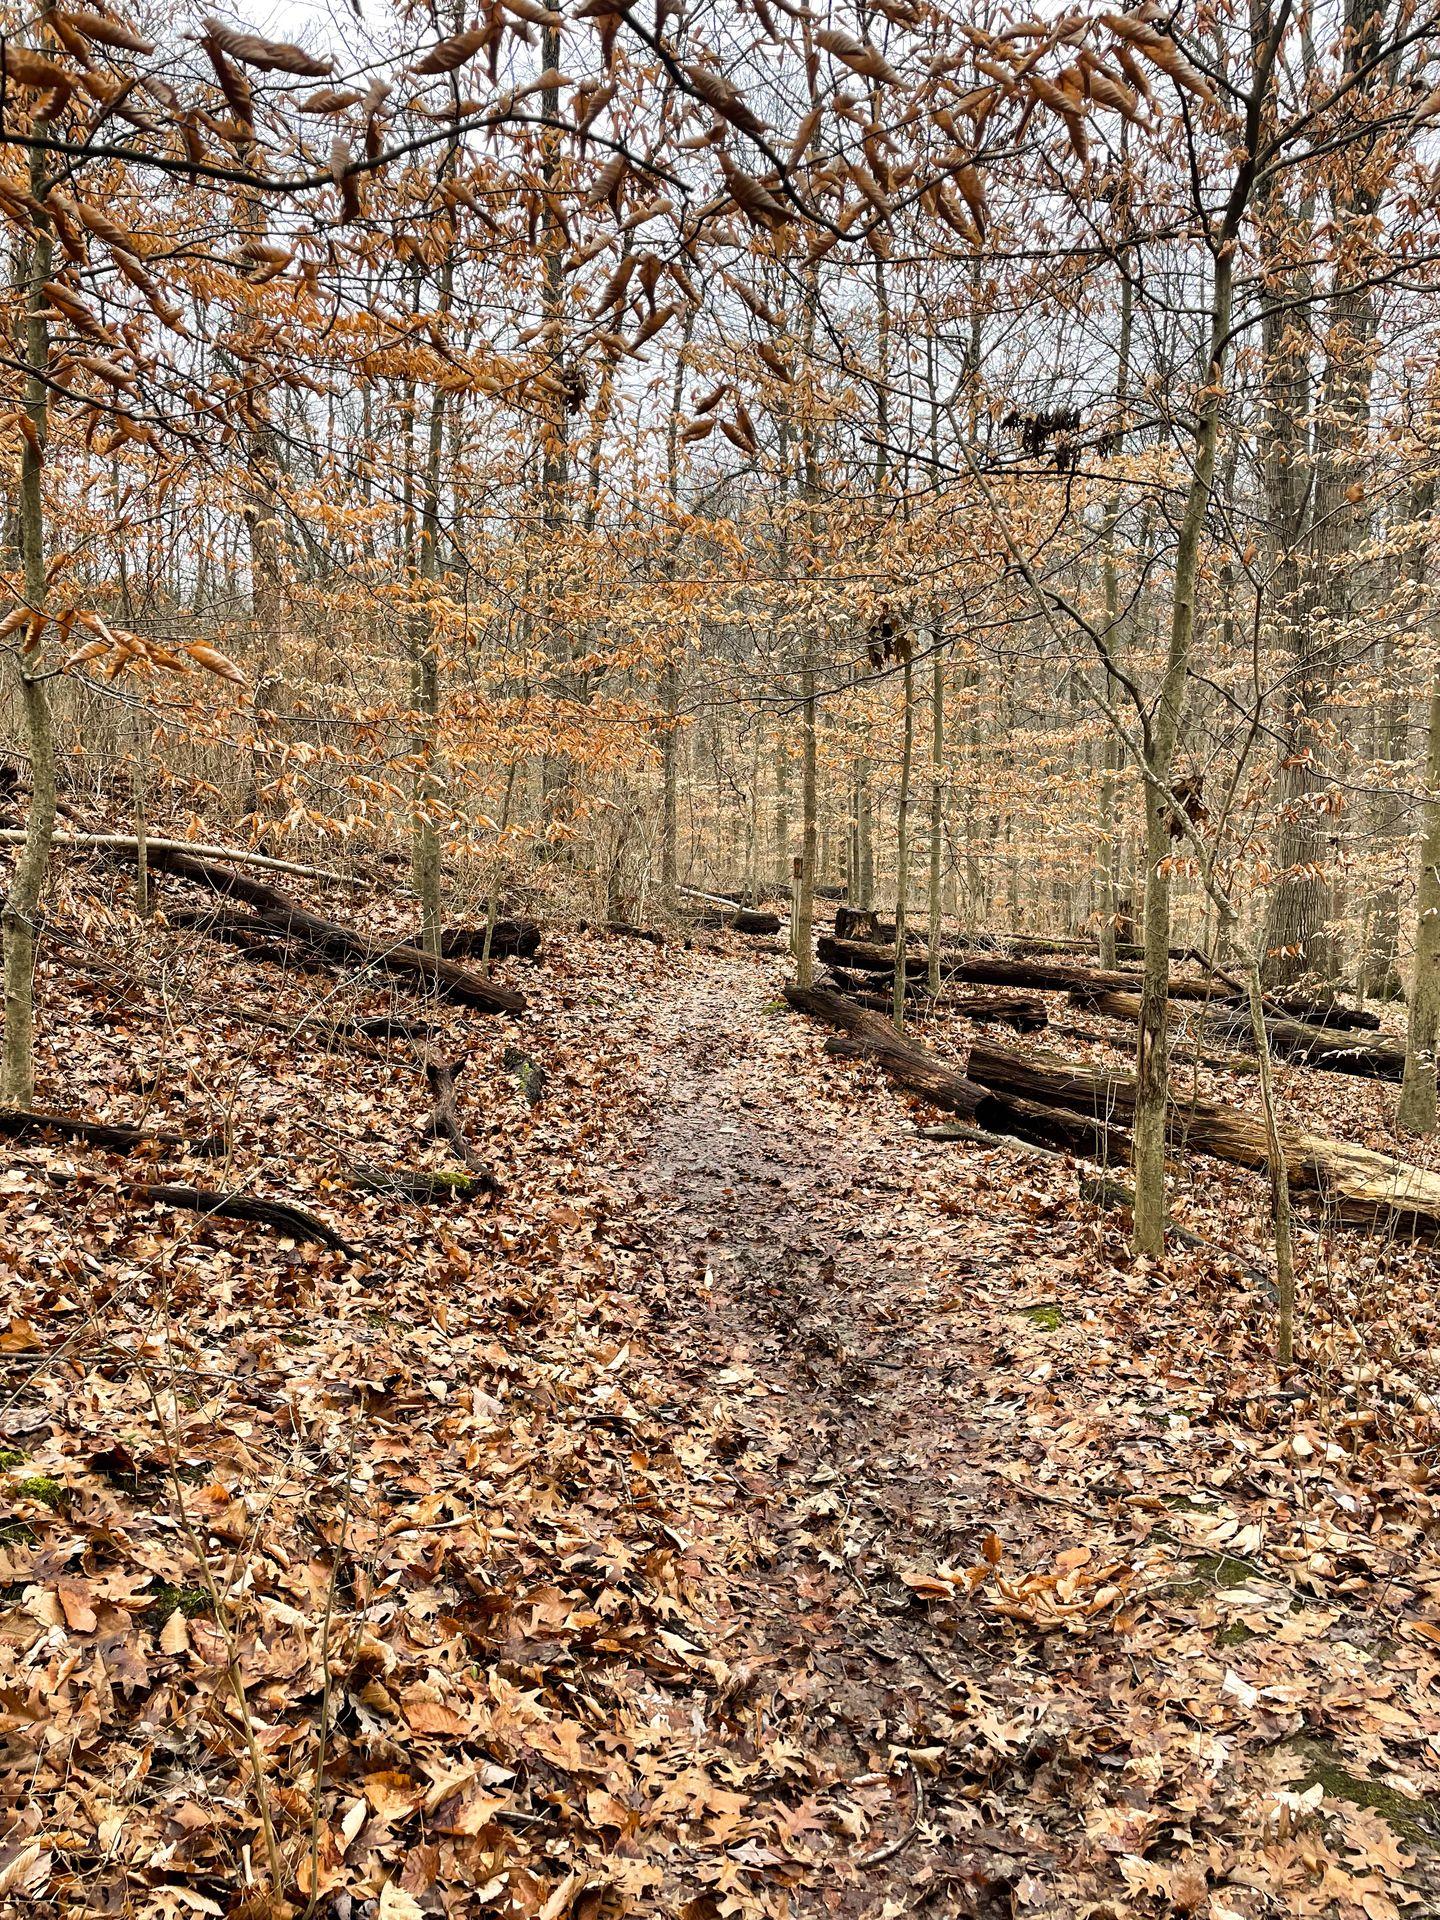 A muddy trail surrounded by bare trees and fallen leaves